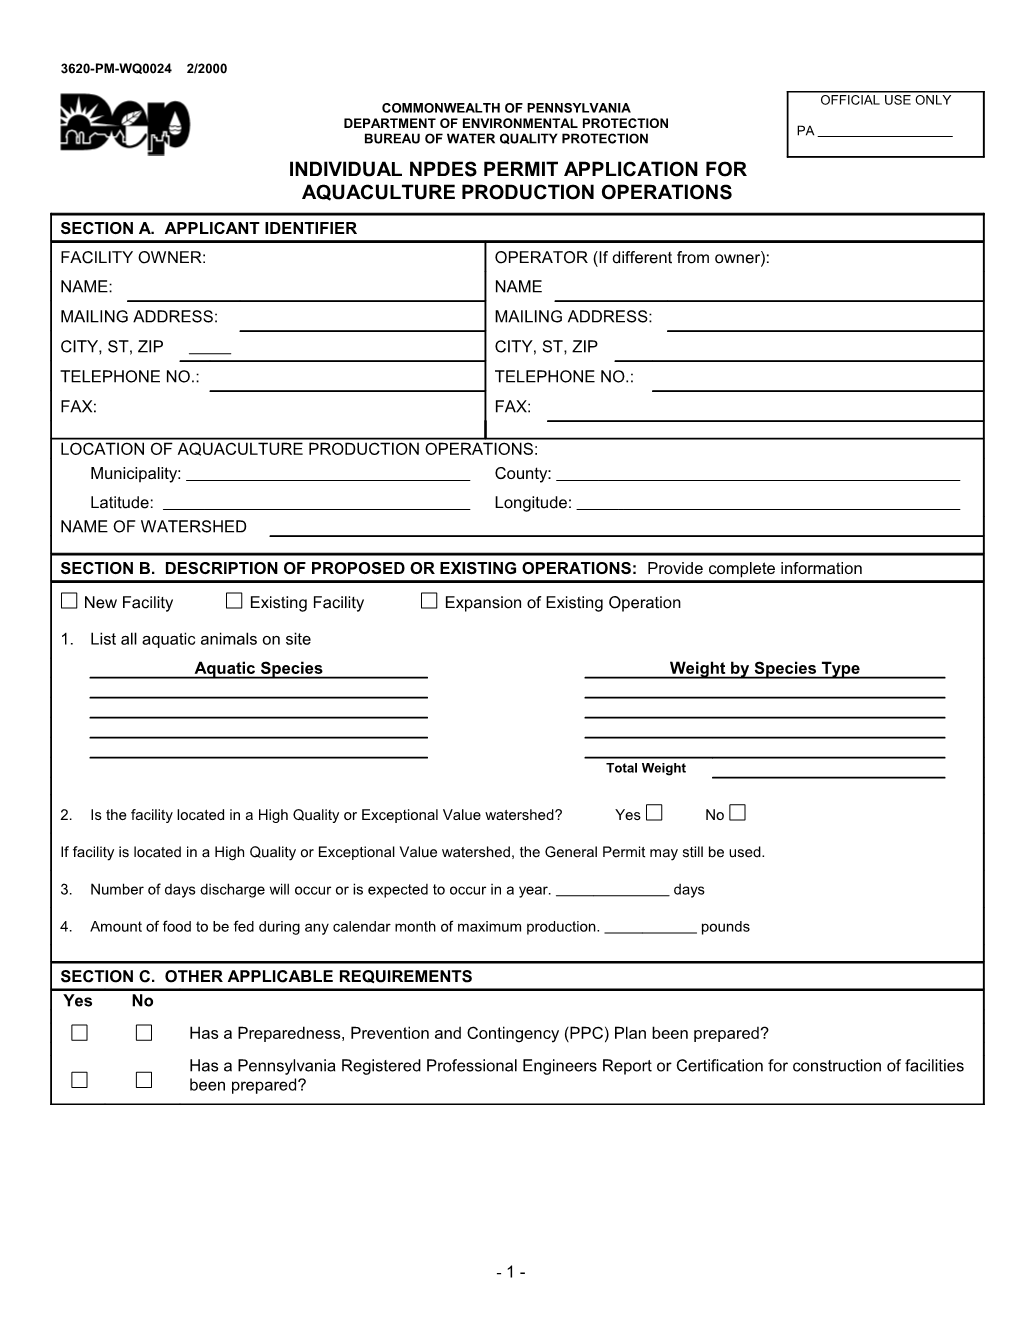 Individual Npdes Permit Application For